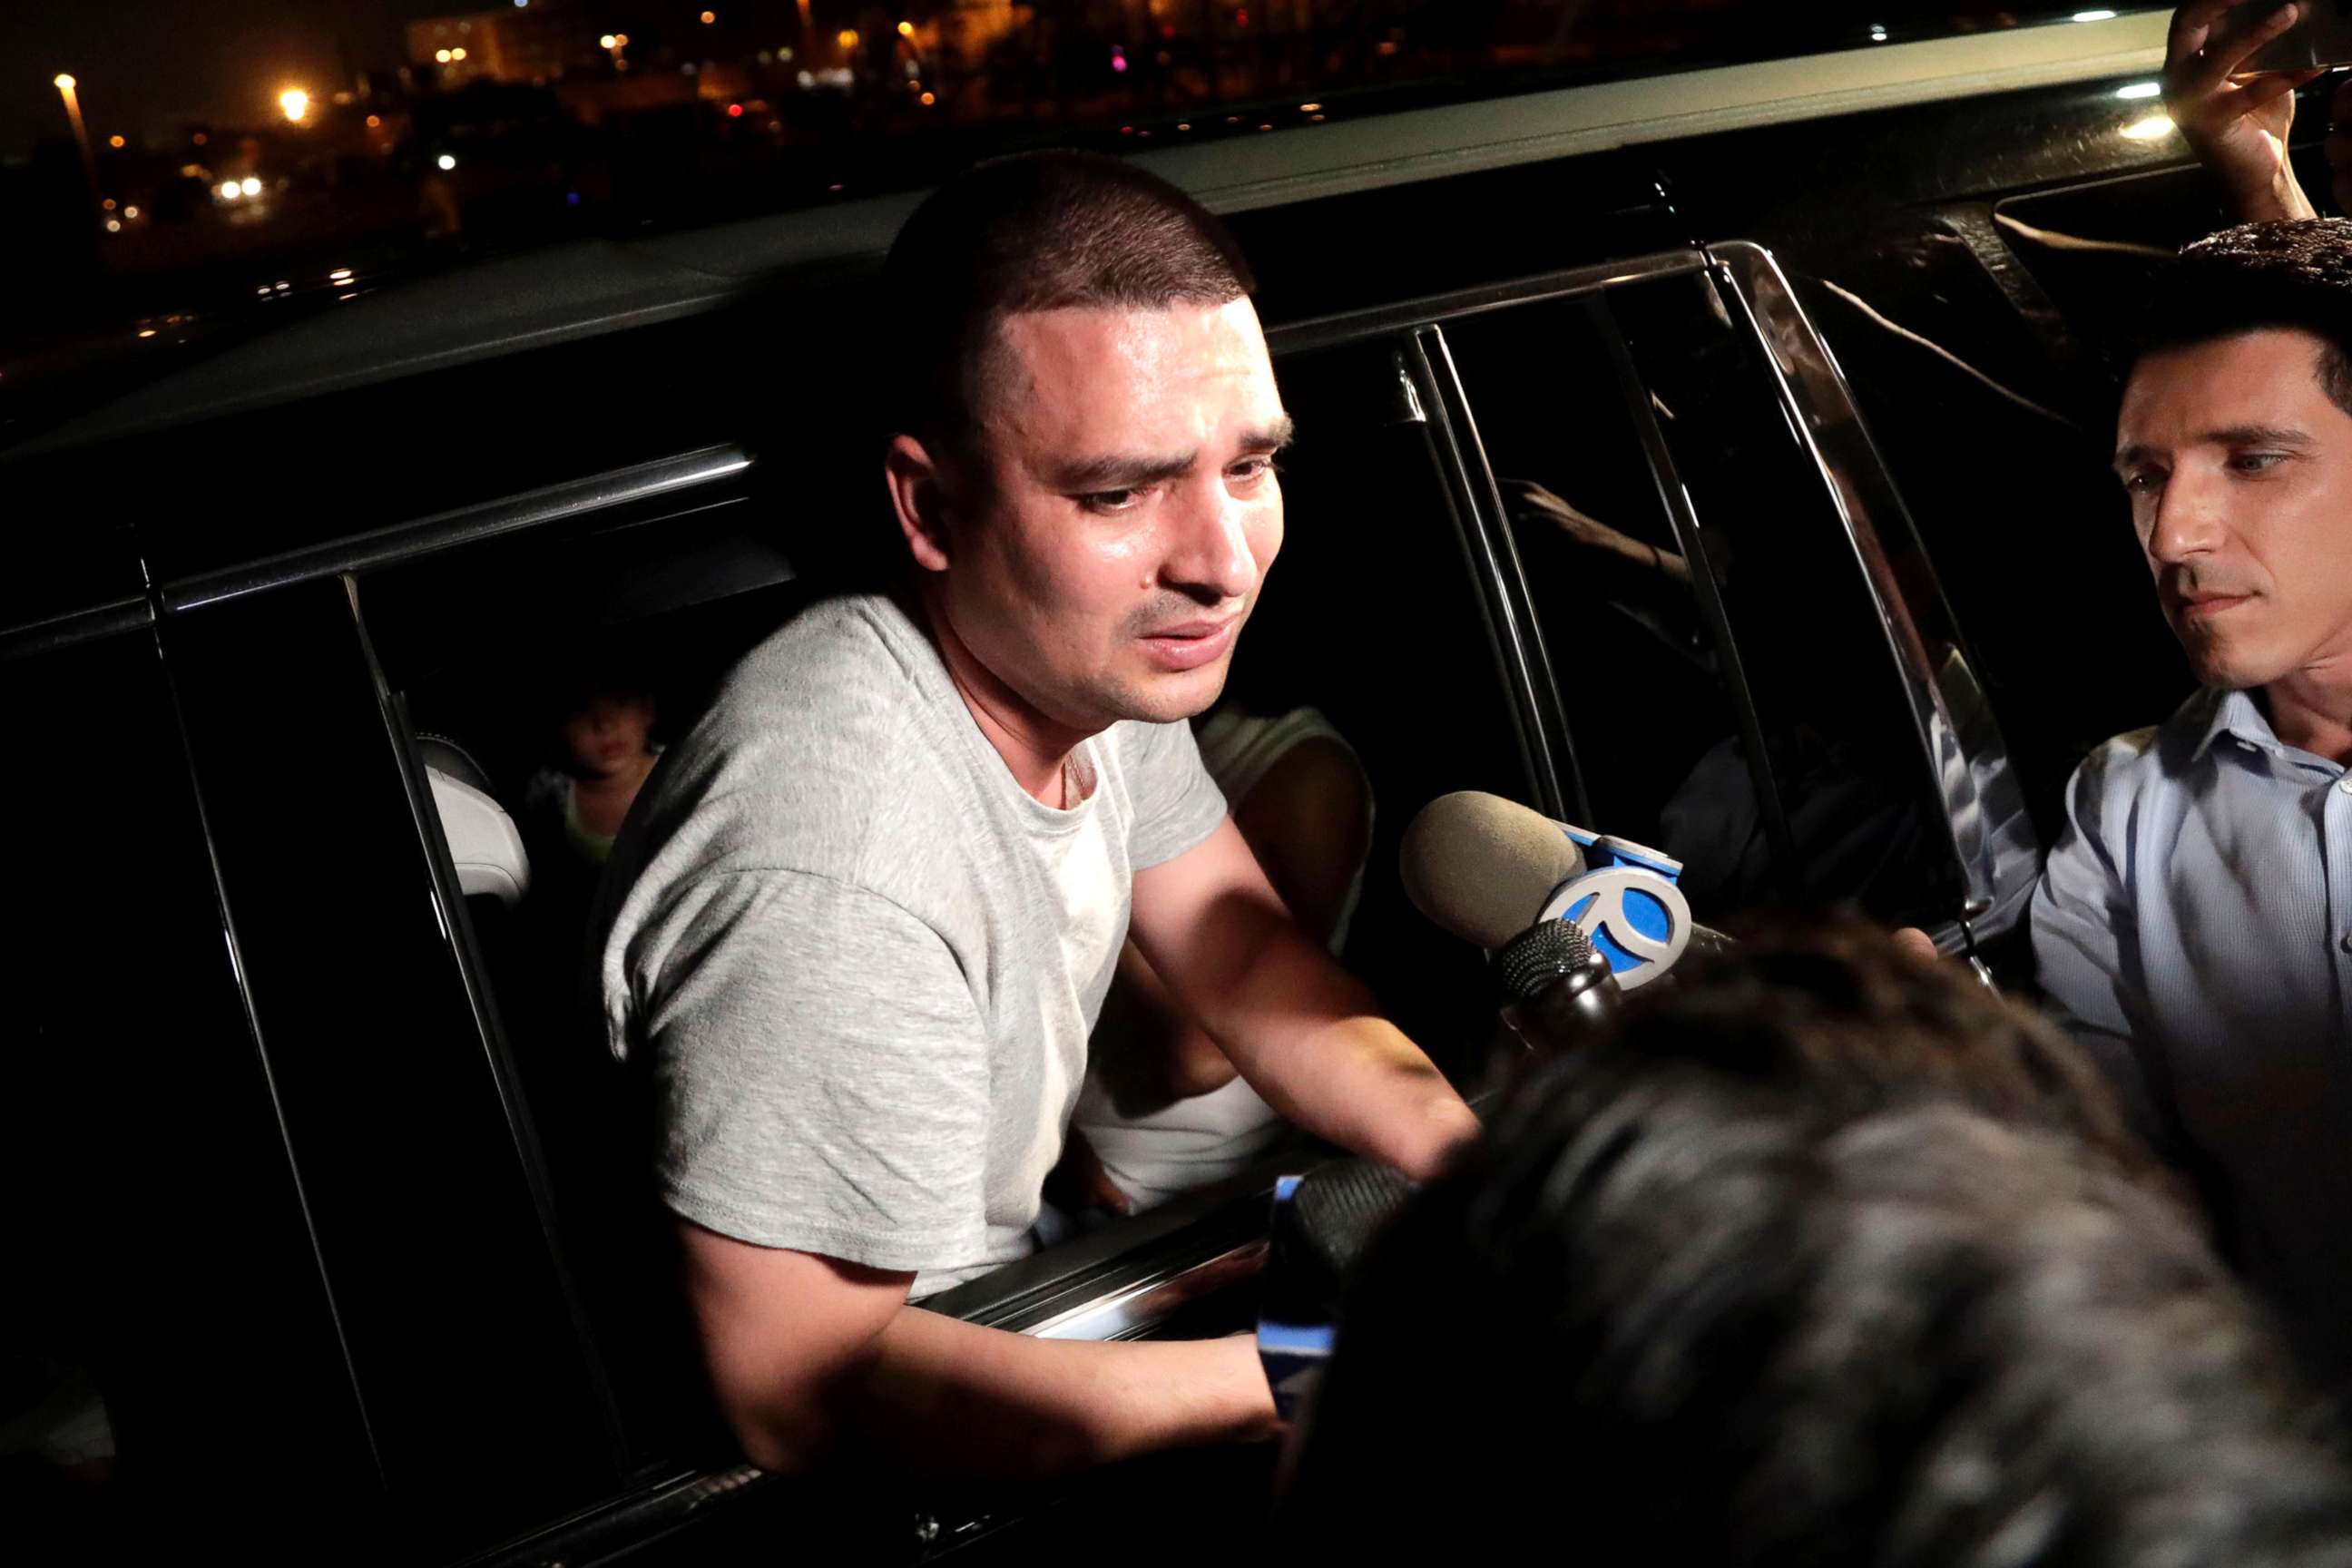 PHOTO: Pablo Villavicencio leans out of an SUV while talking to reporters after being released from the Hudson County Correctional Facility, July 24, 2018, in Kearny, N.J.